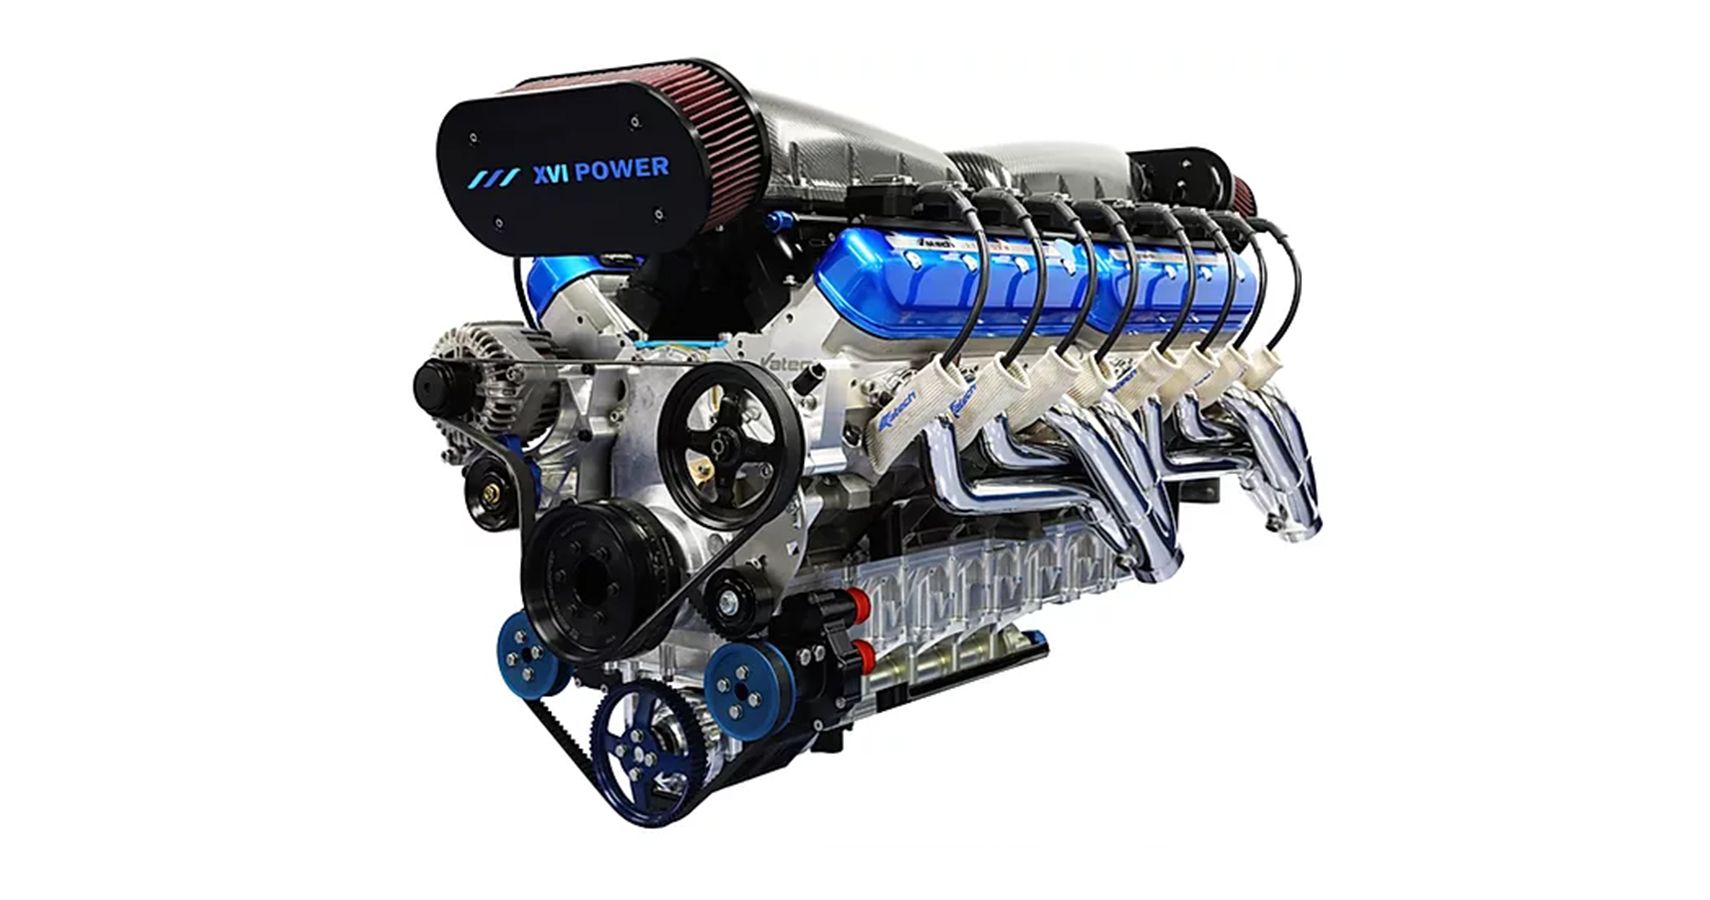 Sixteen Power 1,600 Supercharged V16